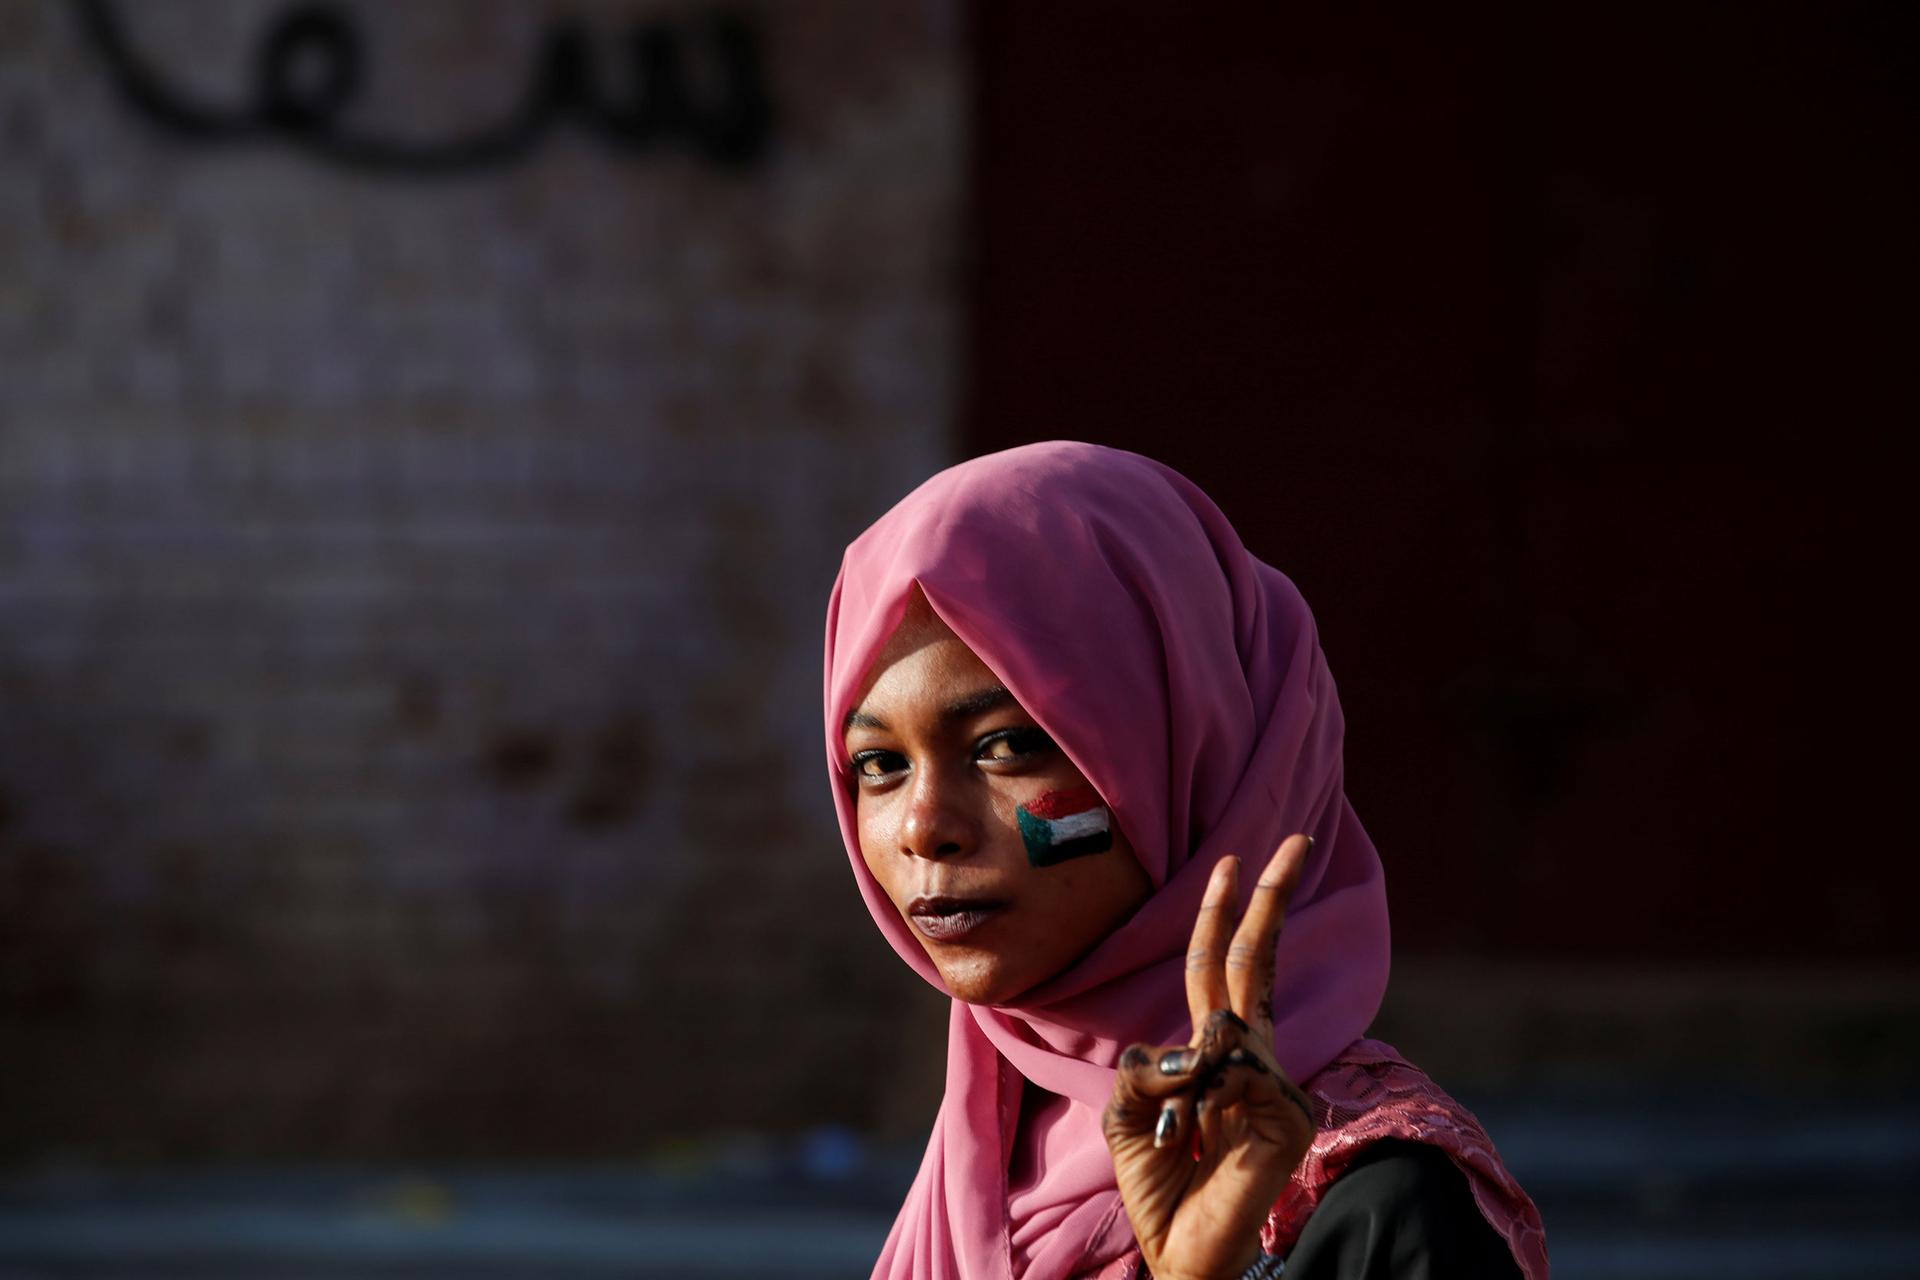 A woman is shown wearing a pink headscarf and with a Sudanese flag painted on her cheek.